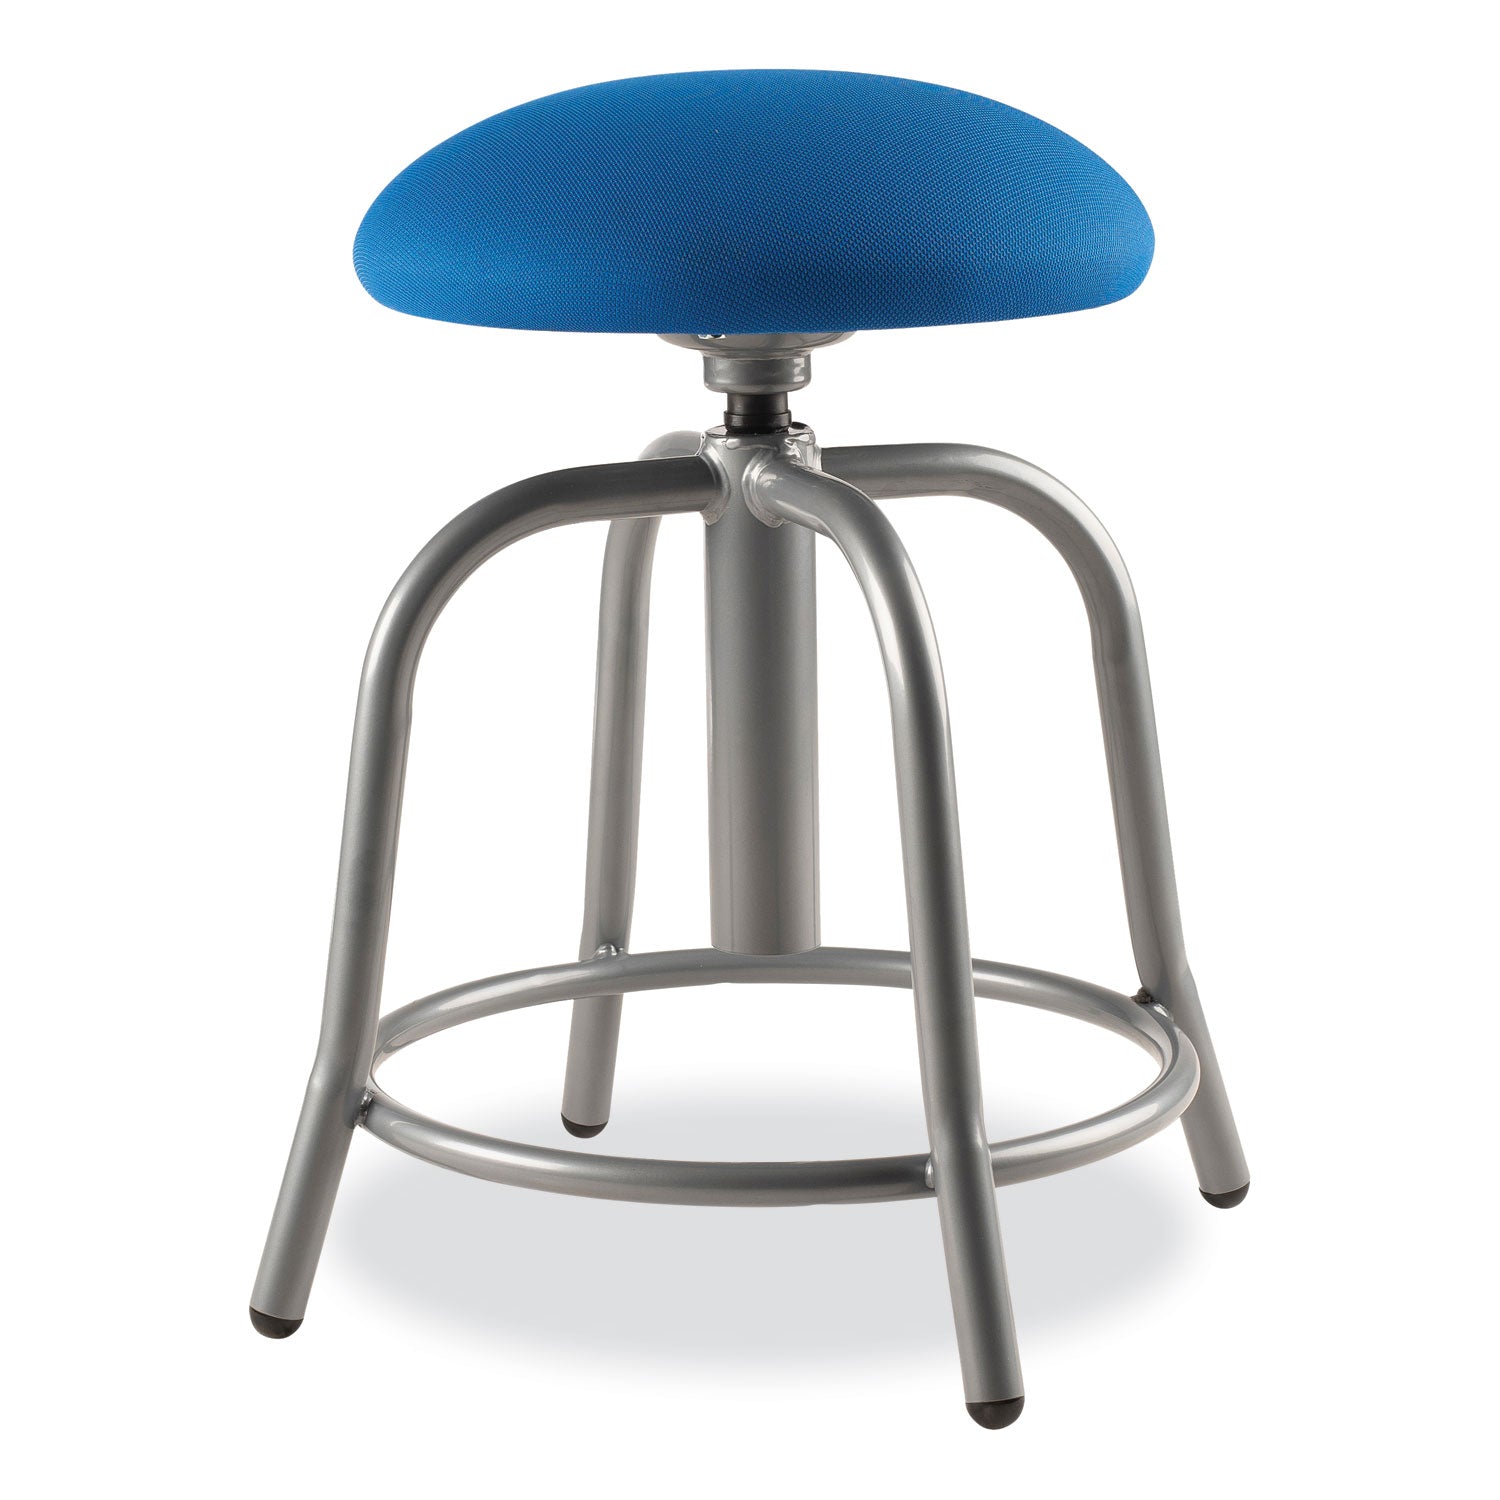 6800-series-height-adj-fabric-padded-seat-stool-supports-300lb-18-25-ht-cobalt-blue-seat-gray-baseships-in-1-3-bus-days_nps6825s02 - 1